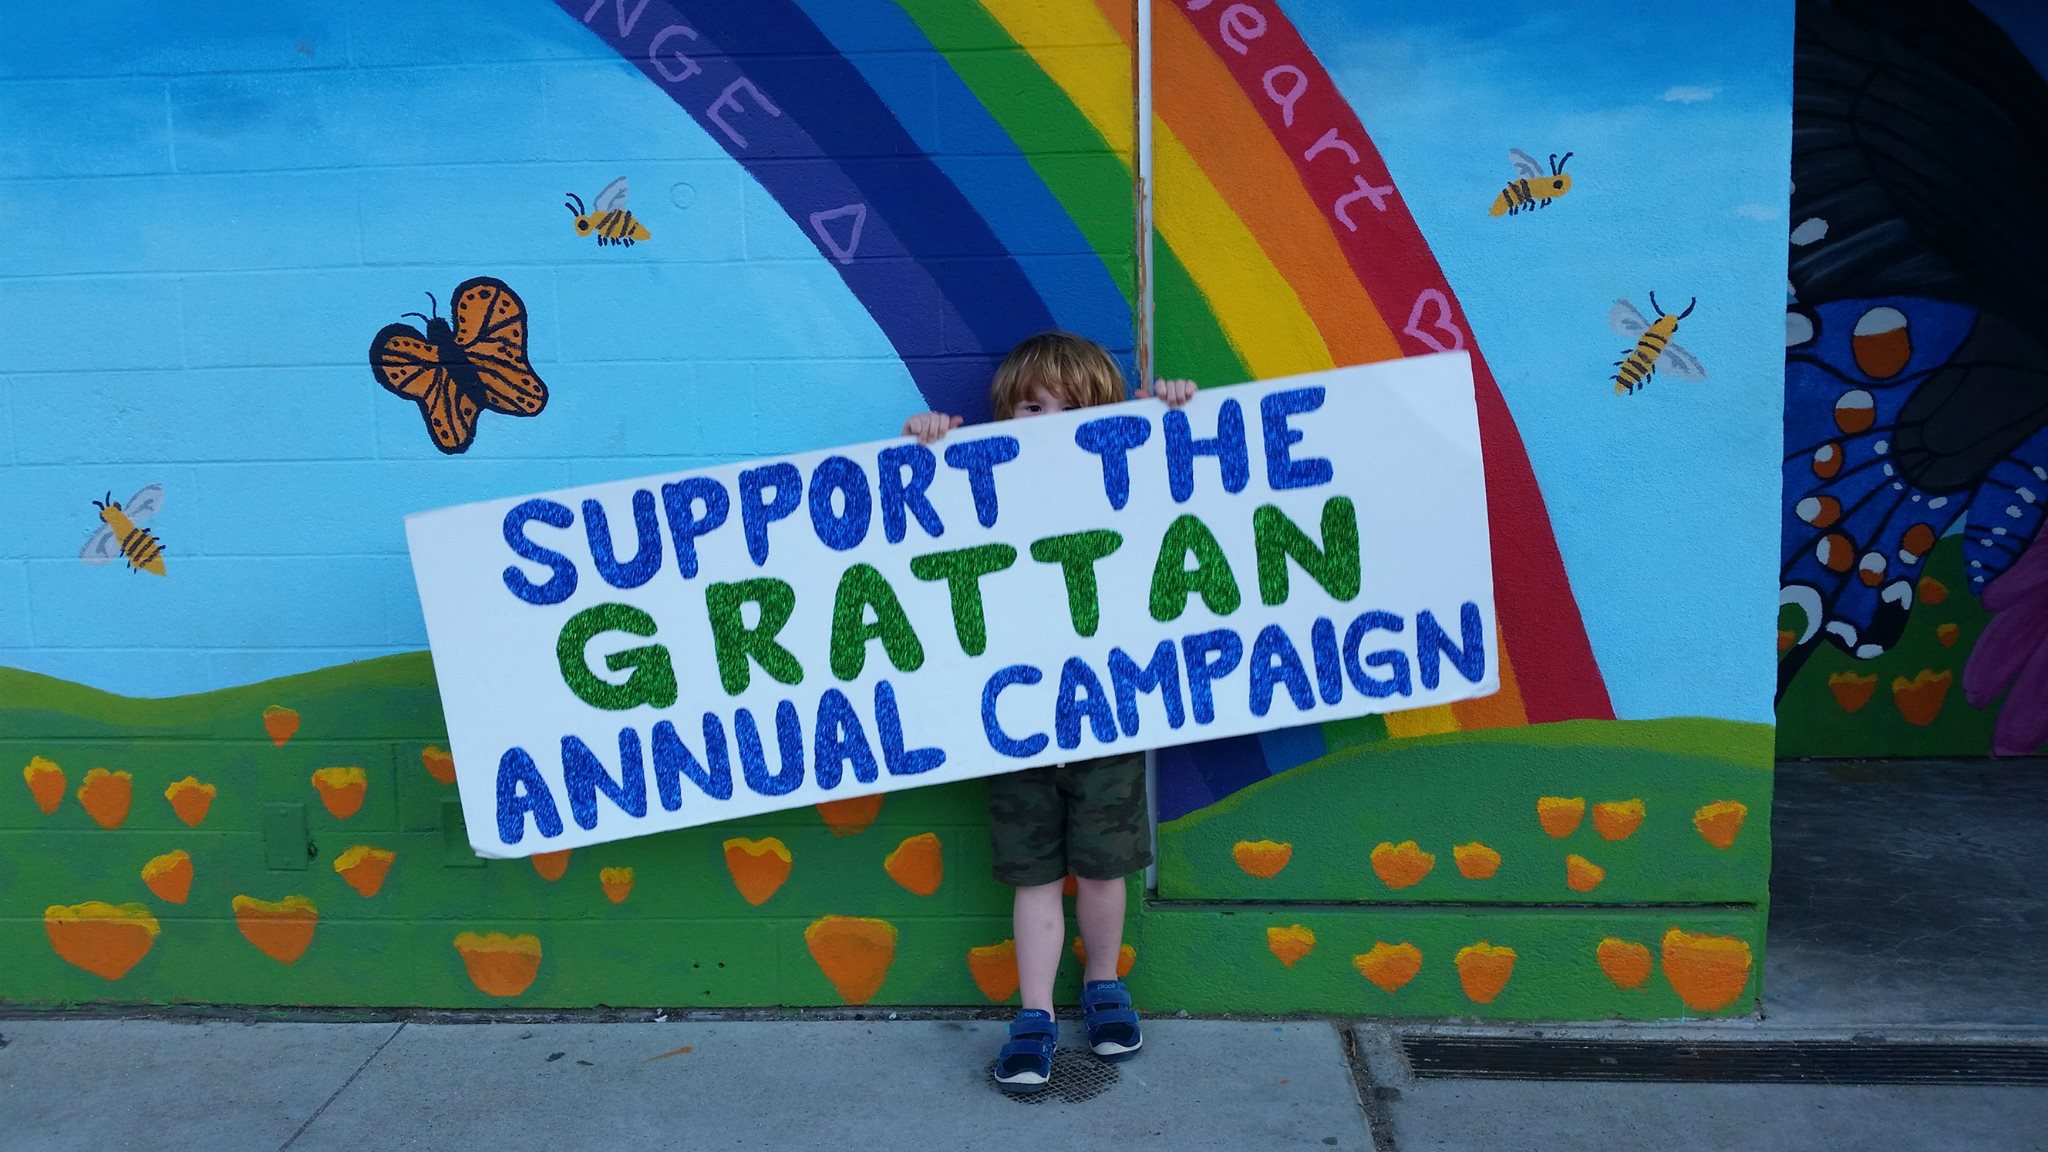 Young boy holding annual campaign sign with colorful mural in background